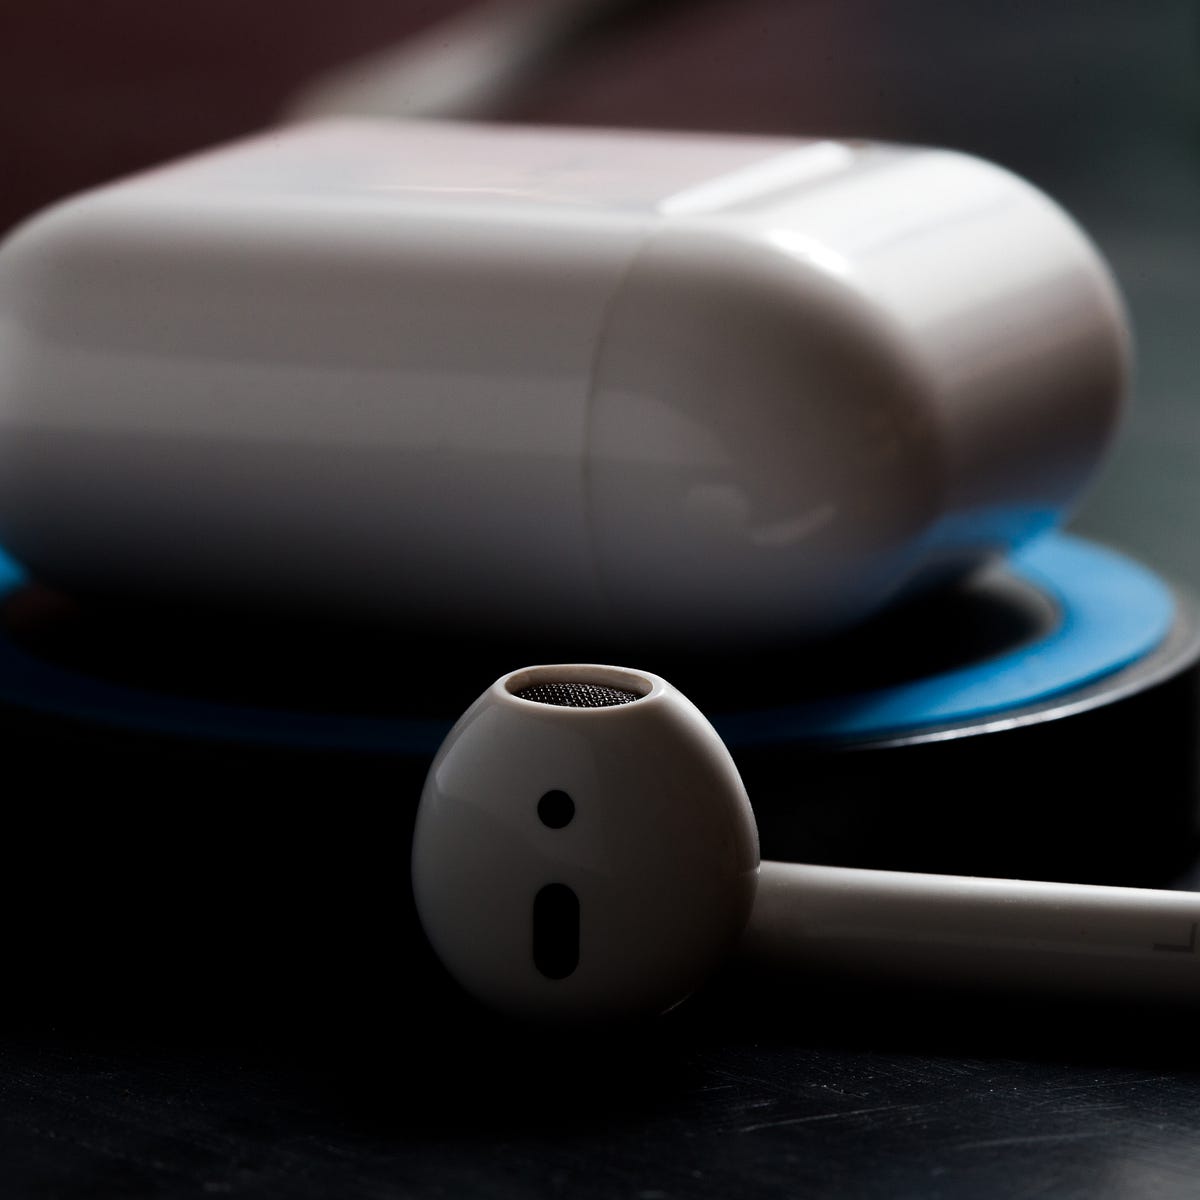 The AirPod Connect Sound Is Beautiful | by Siobhan O'Connor | OneZero